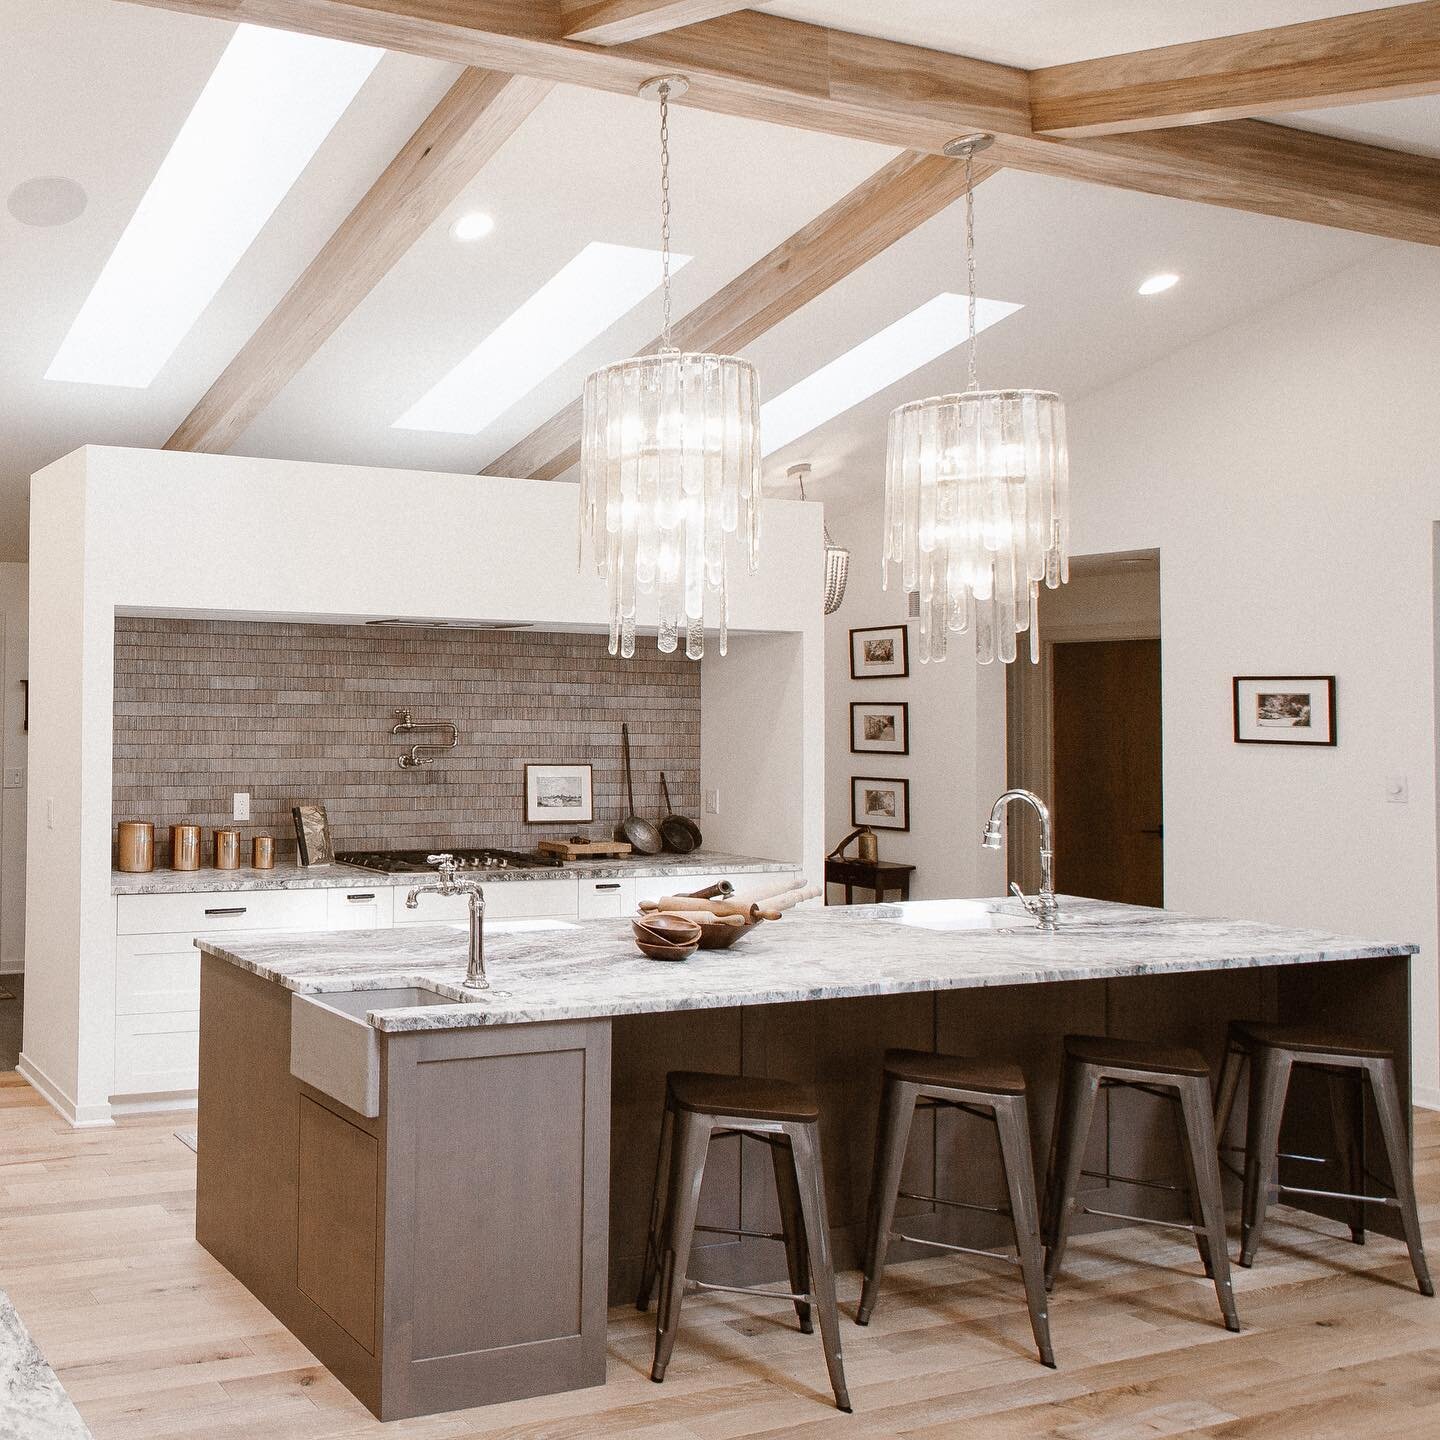 Our Weko Beach Project is one that took on a life of it's own, starting with a stark 90's look and chopped up layout (take a look at the second photo for the original). We reconfigured the entry + kitchen to capitalize on the amazing vaulted ceilings